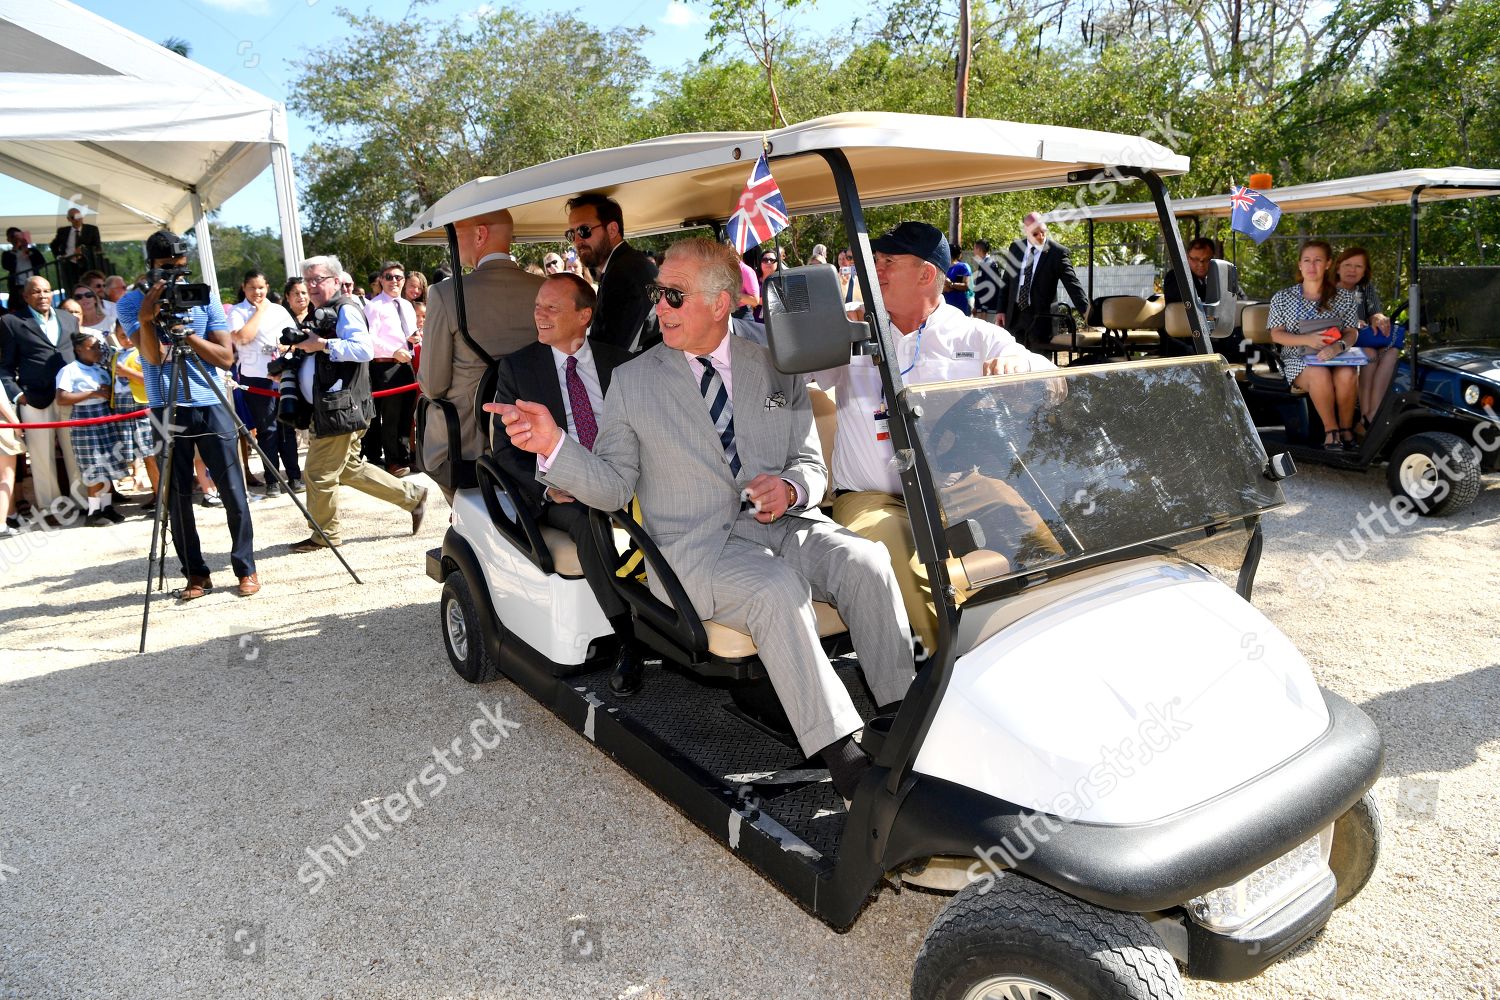 prince-charles-and-camilla-duchess-of-cornwall-caribbean-tour-cayman-islands-shutterstock-editorial-10180820bx.jpg